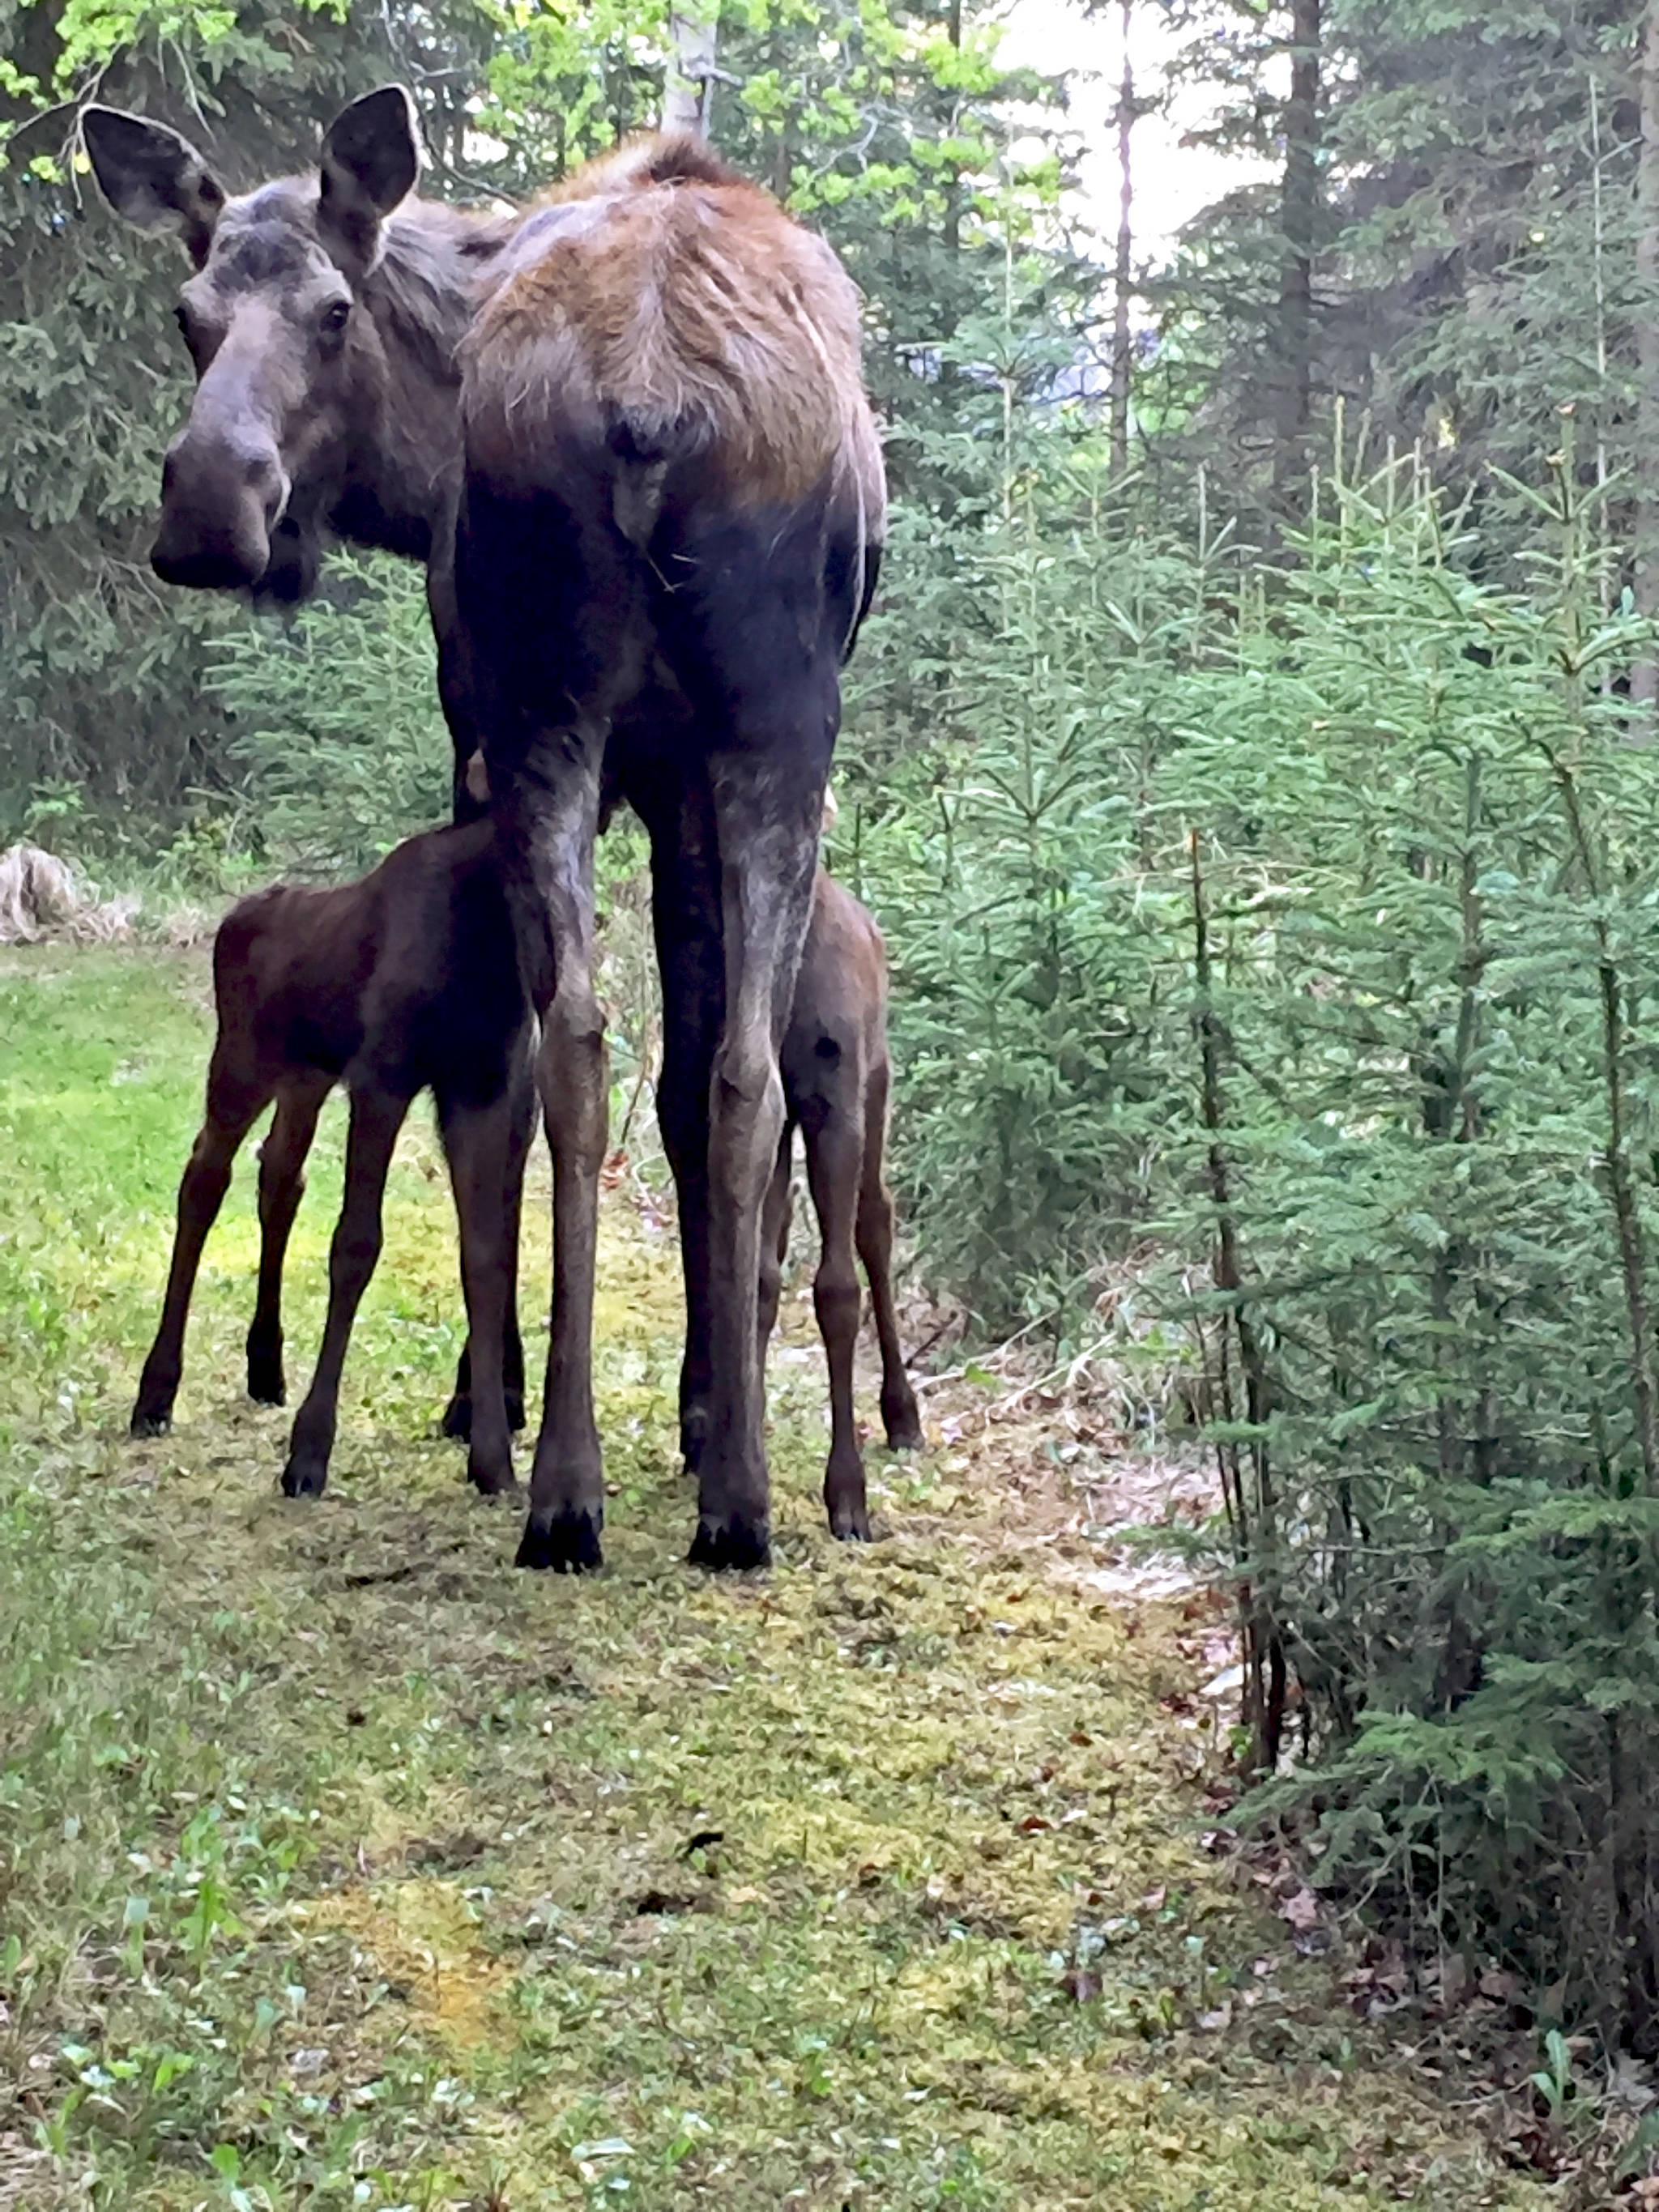 A cow moose feeds her newborn calves in the backyard of a home Tuesday in Soldotna Female moose are giving birth to calves all over Southcentral Alaska, usually twins, and will be temperamental and aggressive as they protect their young. The Alaska Department of Fish and Game advises everyone to stay clear of moose in backyards, trails and parks, even if the young appear to be orphaned. (Photo by Elizabeth Earl/Peninsula Clarion)